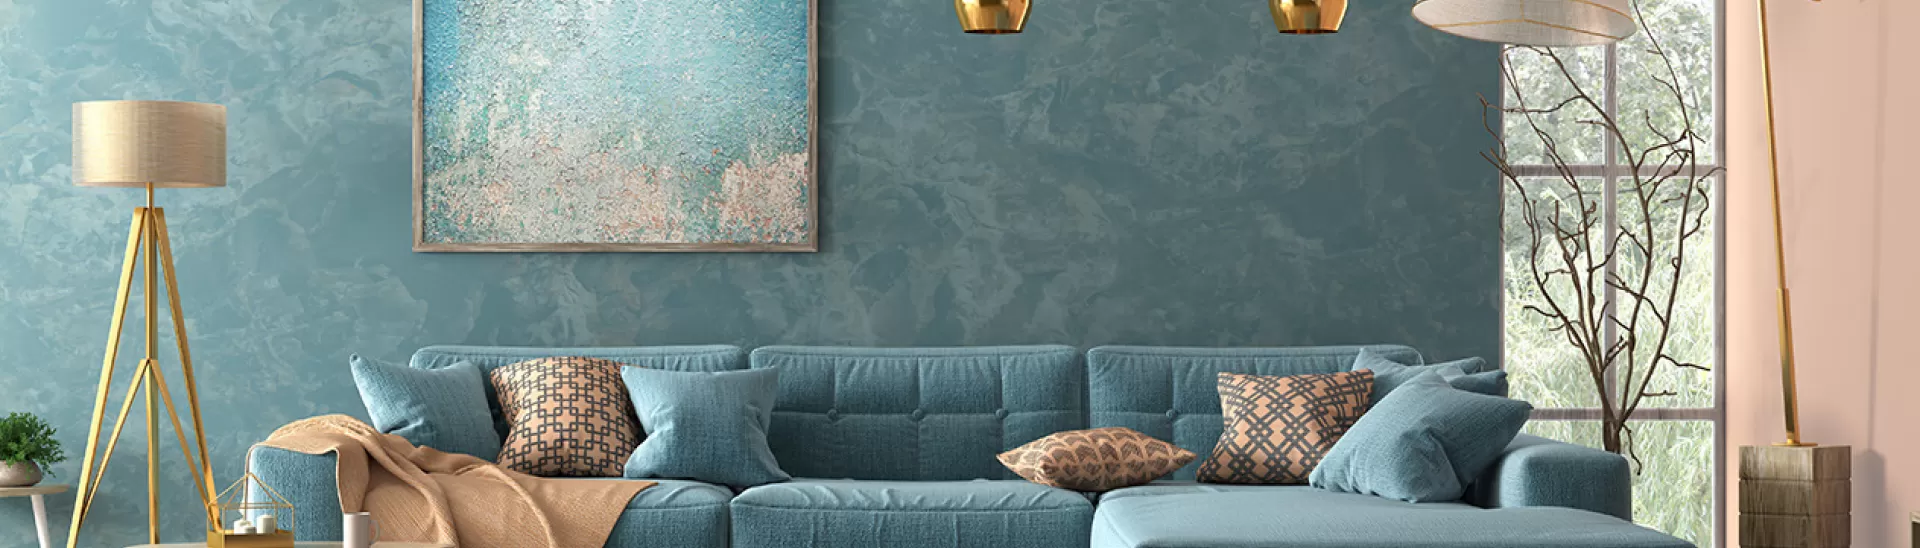 7 Wall Painting Ideas For Your Living Room in 2023 with Images ...